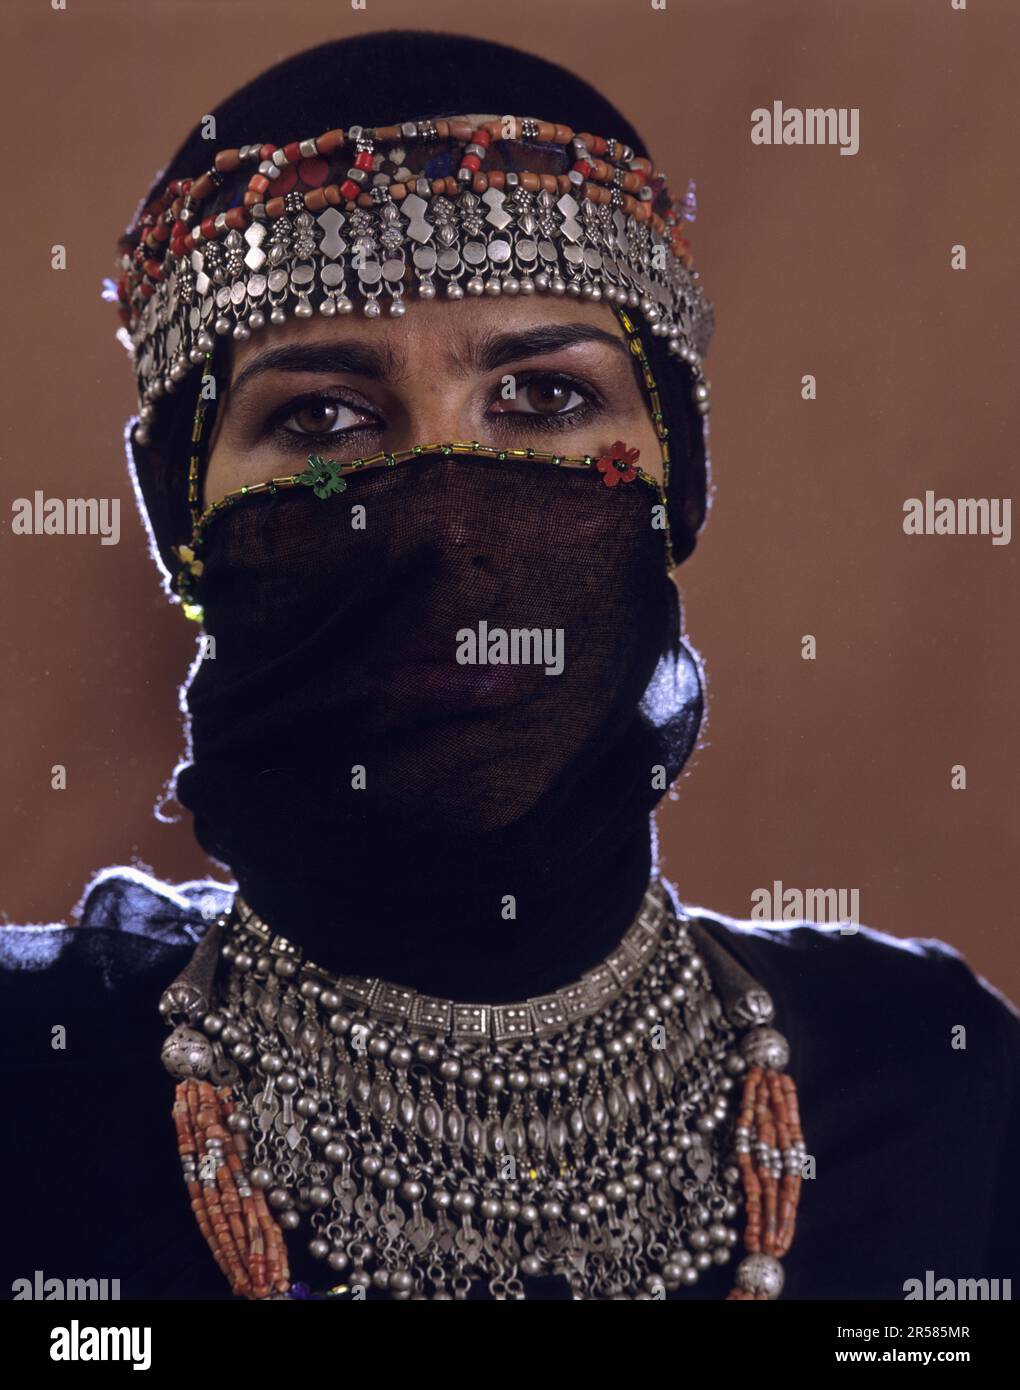 Young woman with face veil and antique silver jewellery, Sanaa, Yemen Stock Photo